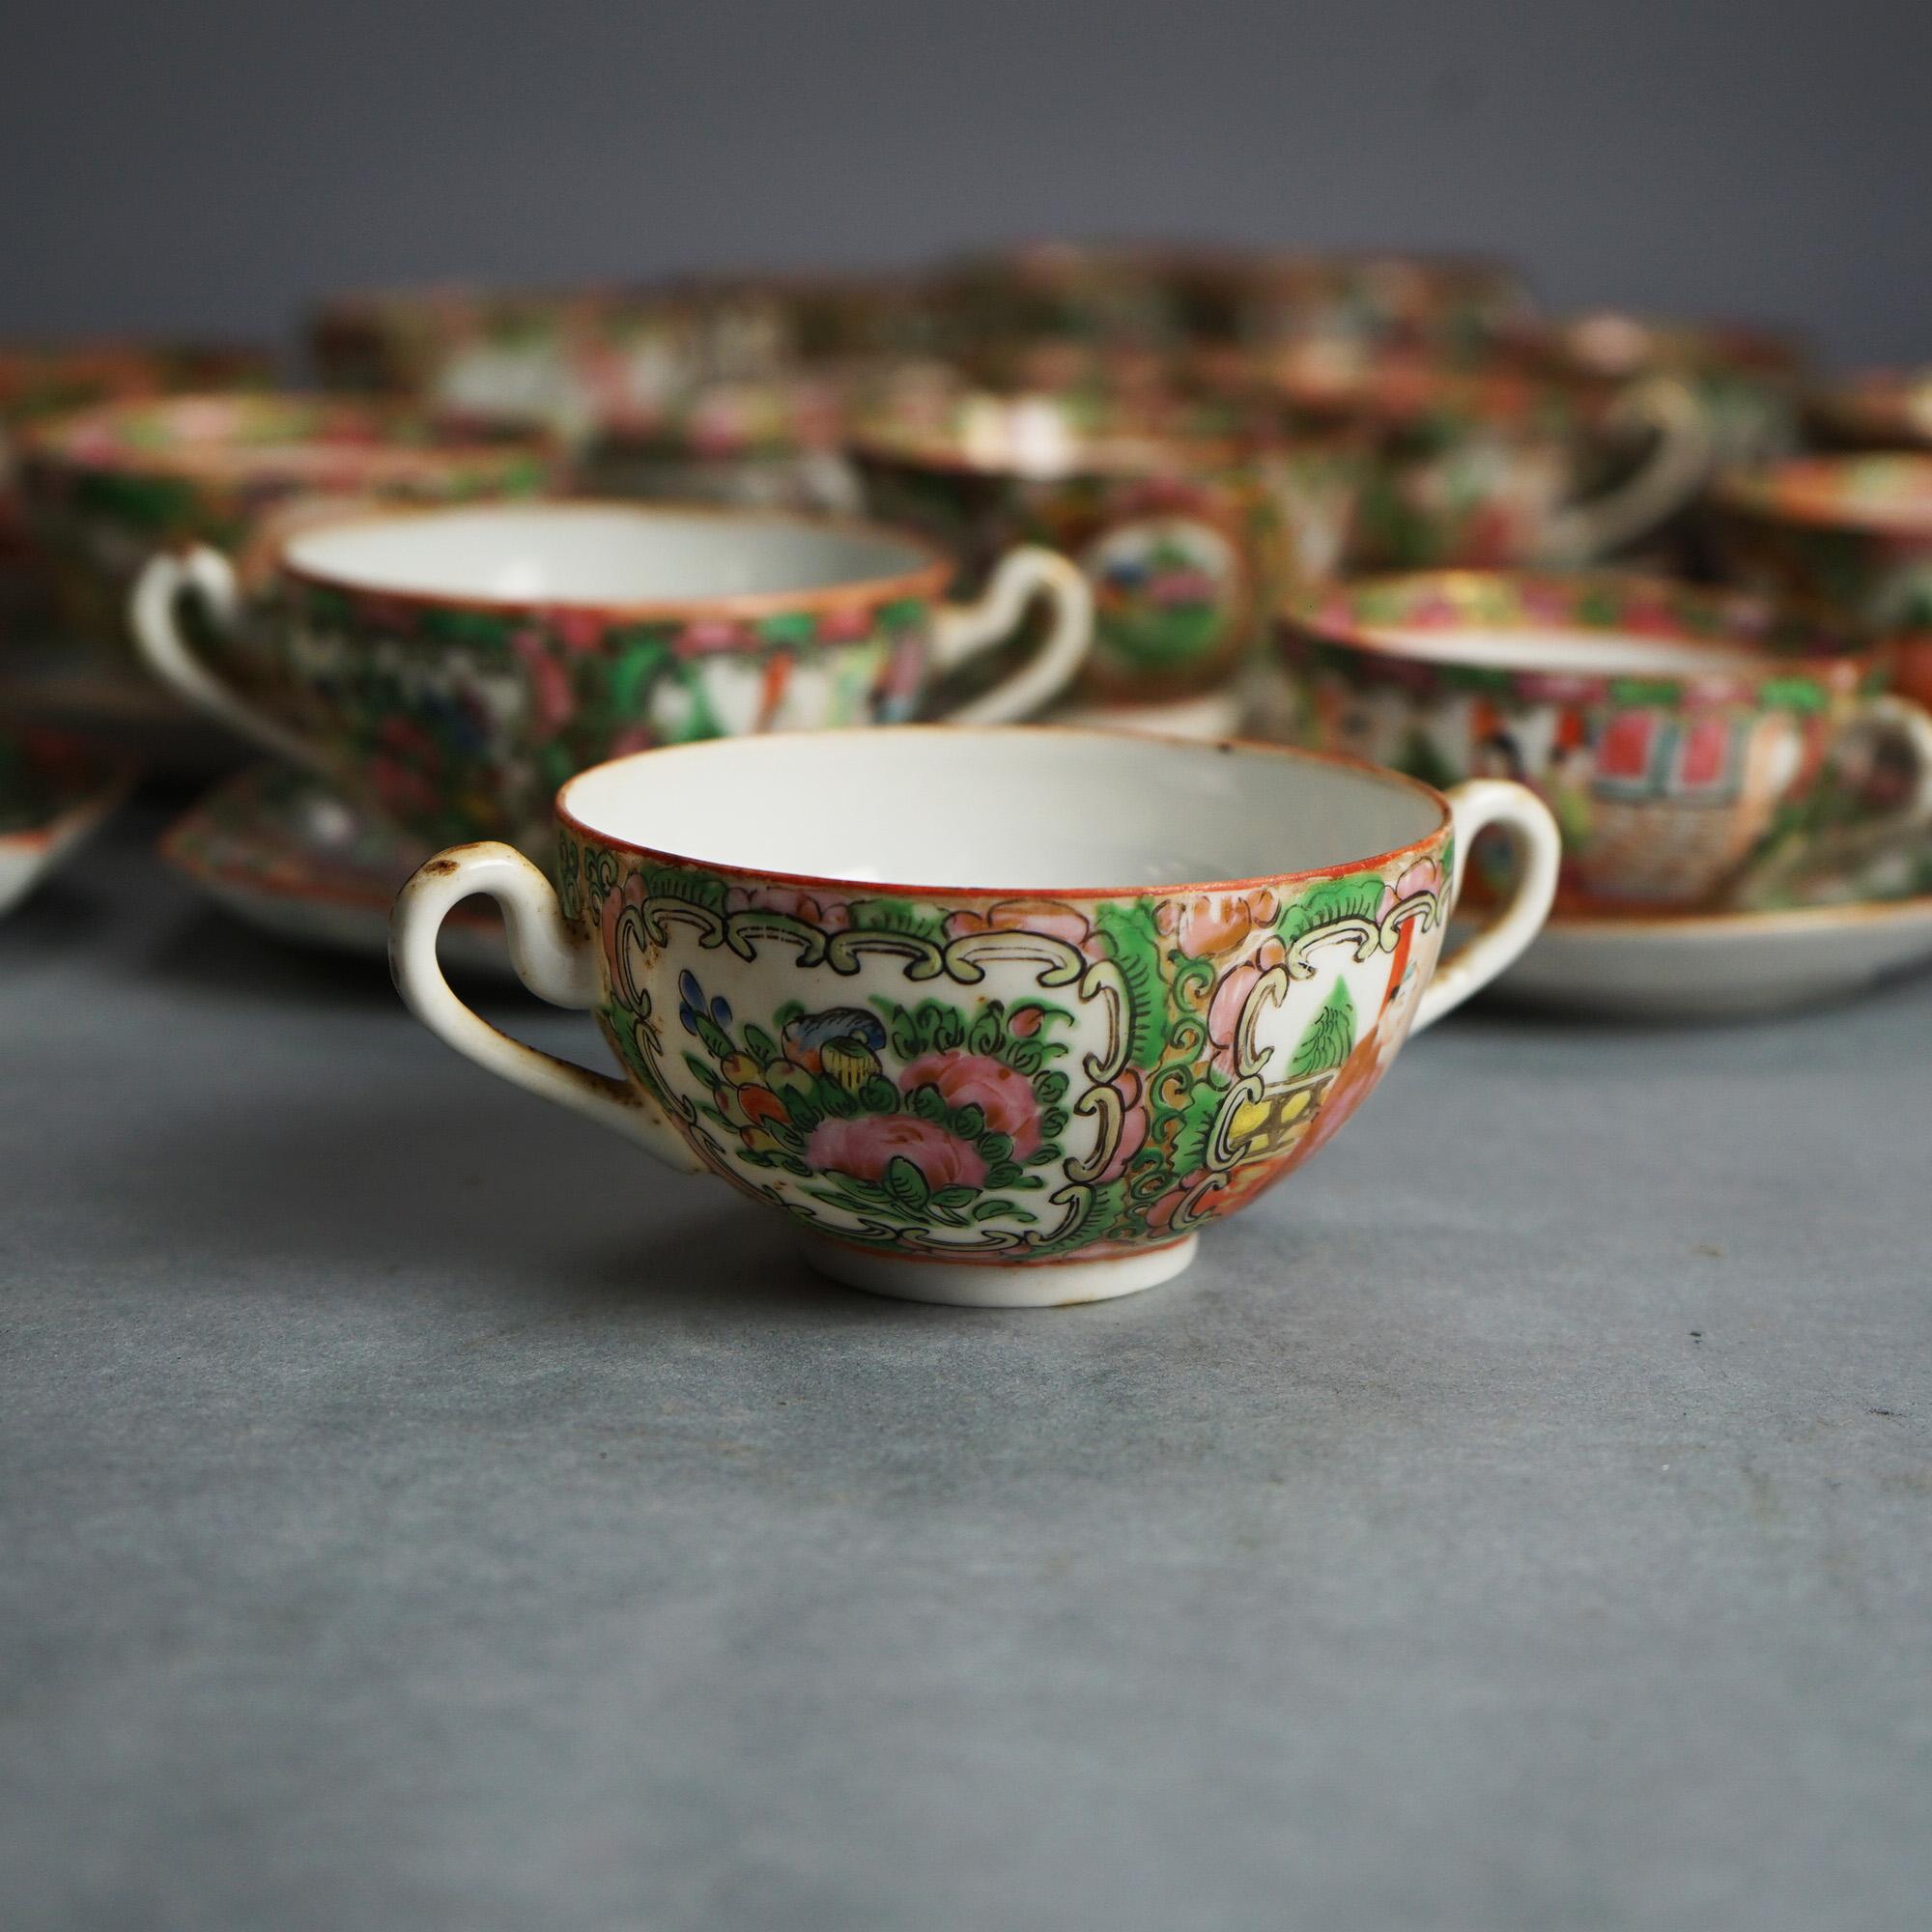 21 Antique Chinese Rose Medallion Porcelain Tea Cups & 20 Saucers C1900 In Good Condition For Sale In Big Flats, NY